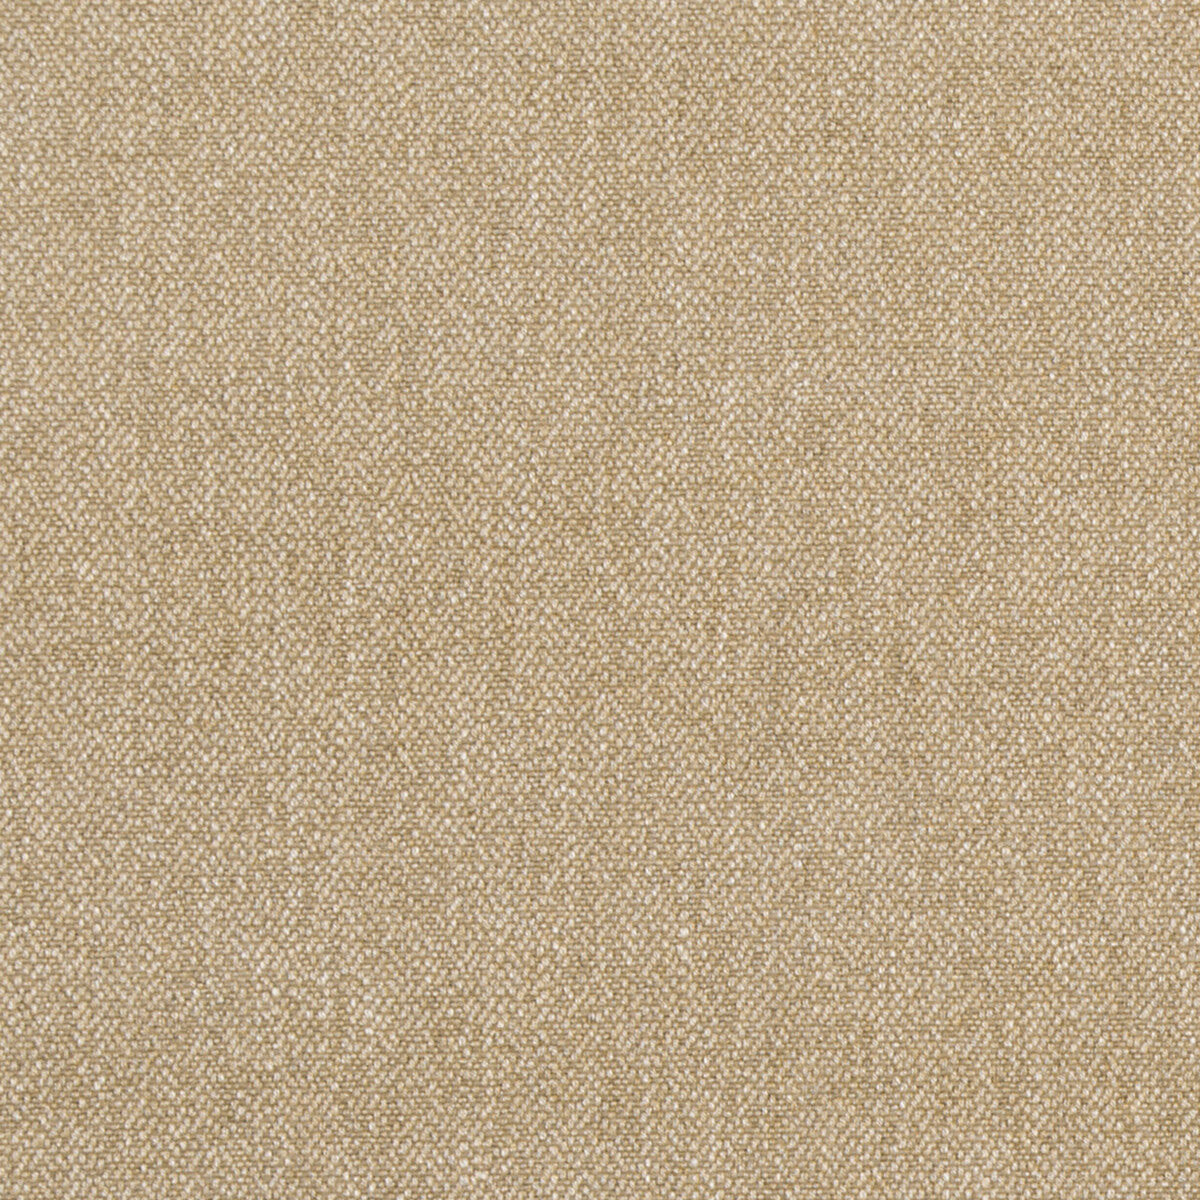 Verdure fabric in biscuit color - pattern ED85175.235.0 - by Threads in the Threads Colour Library collection